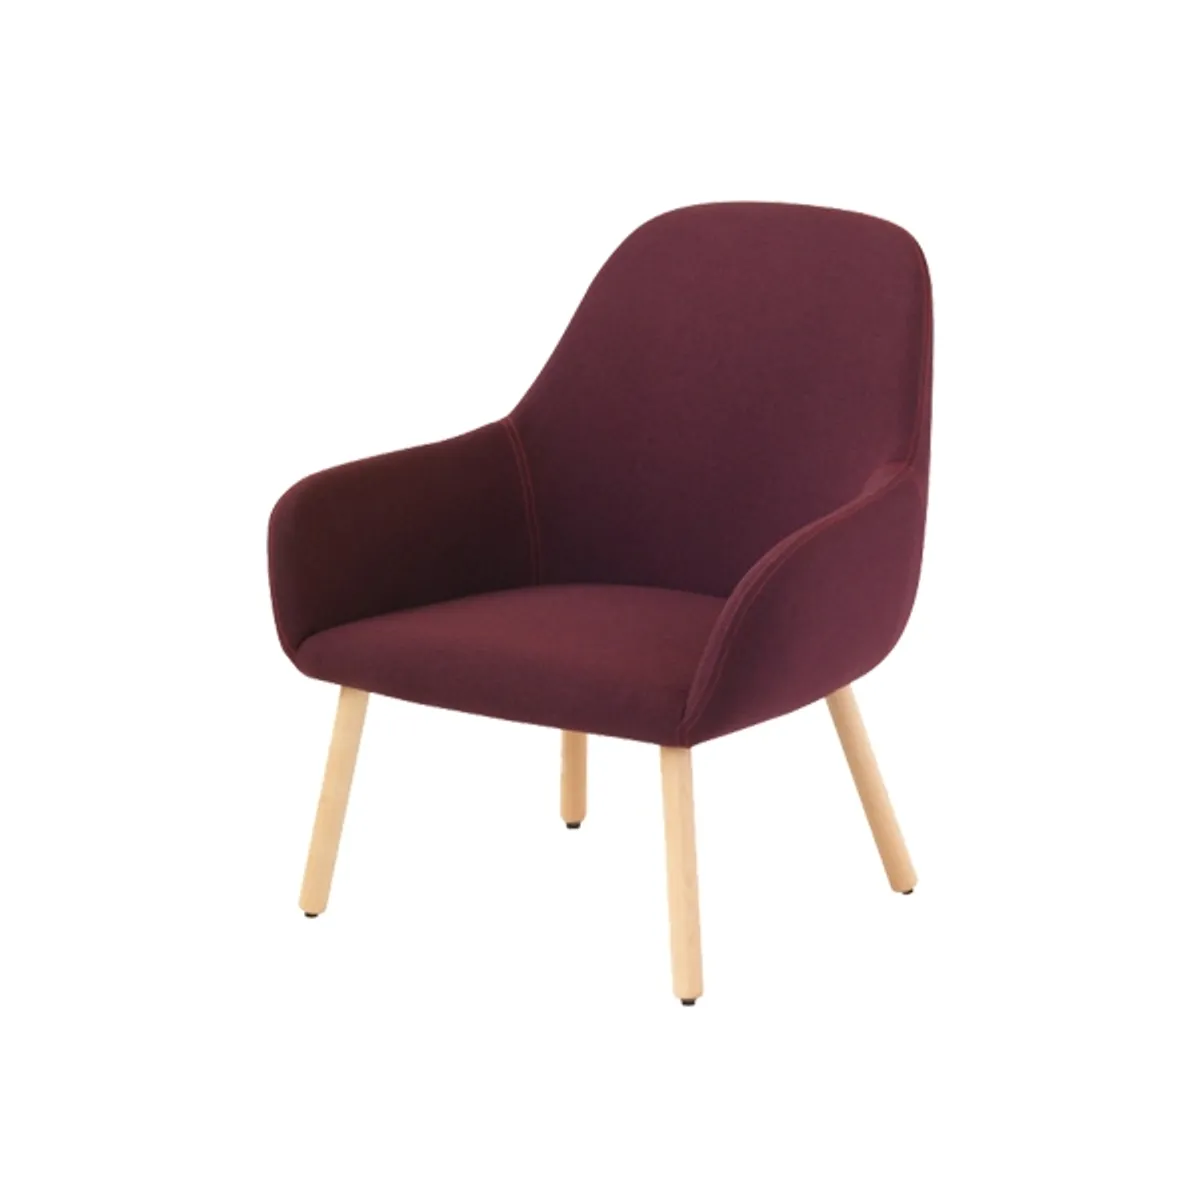 Myrawoodloungechair Inside Out Contracts